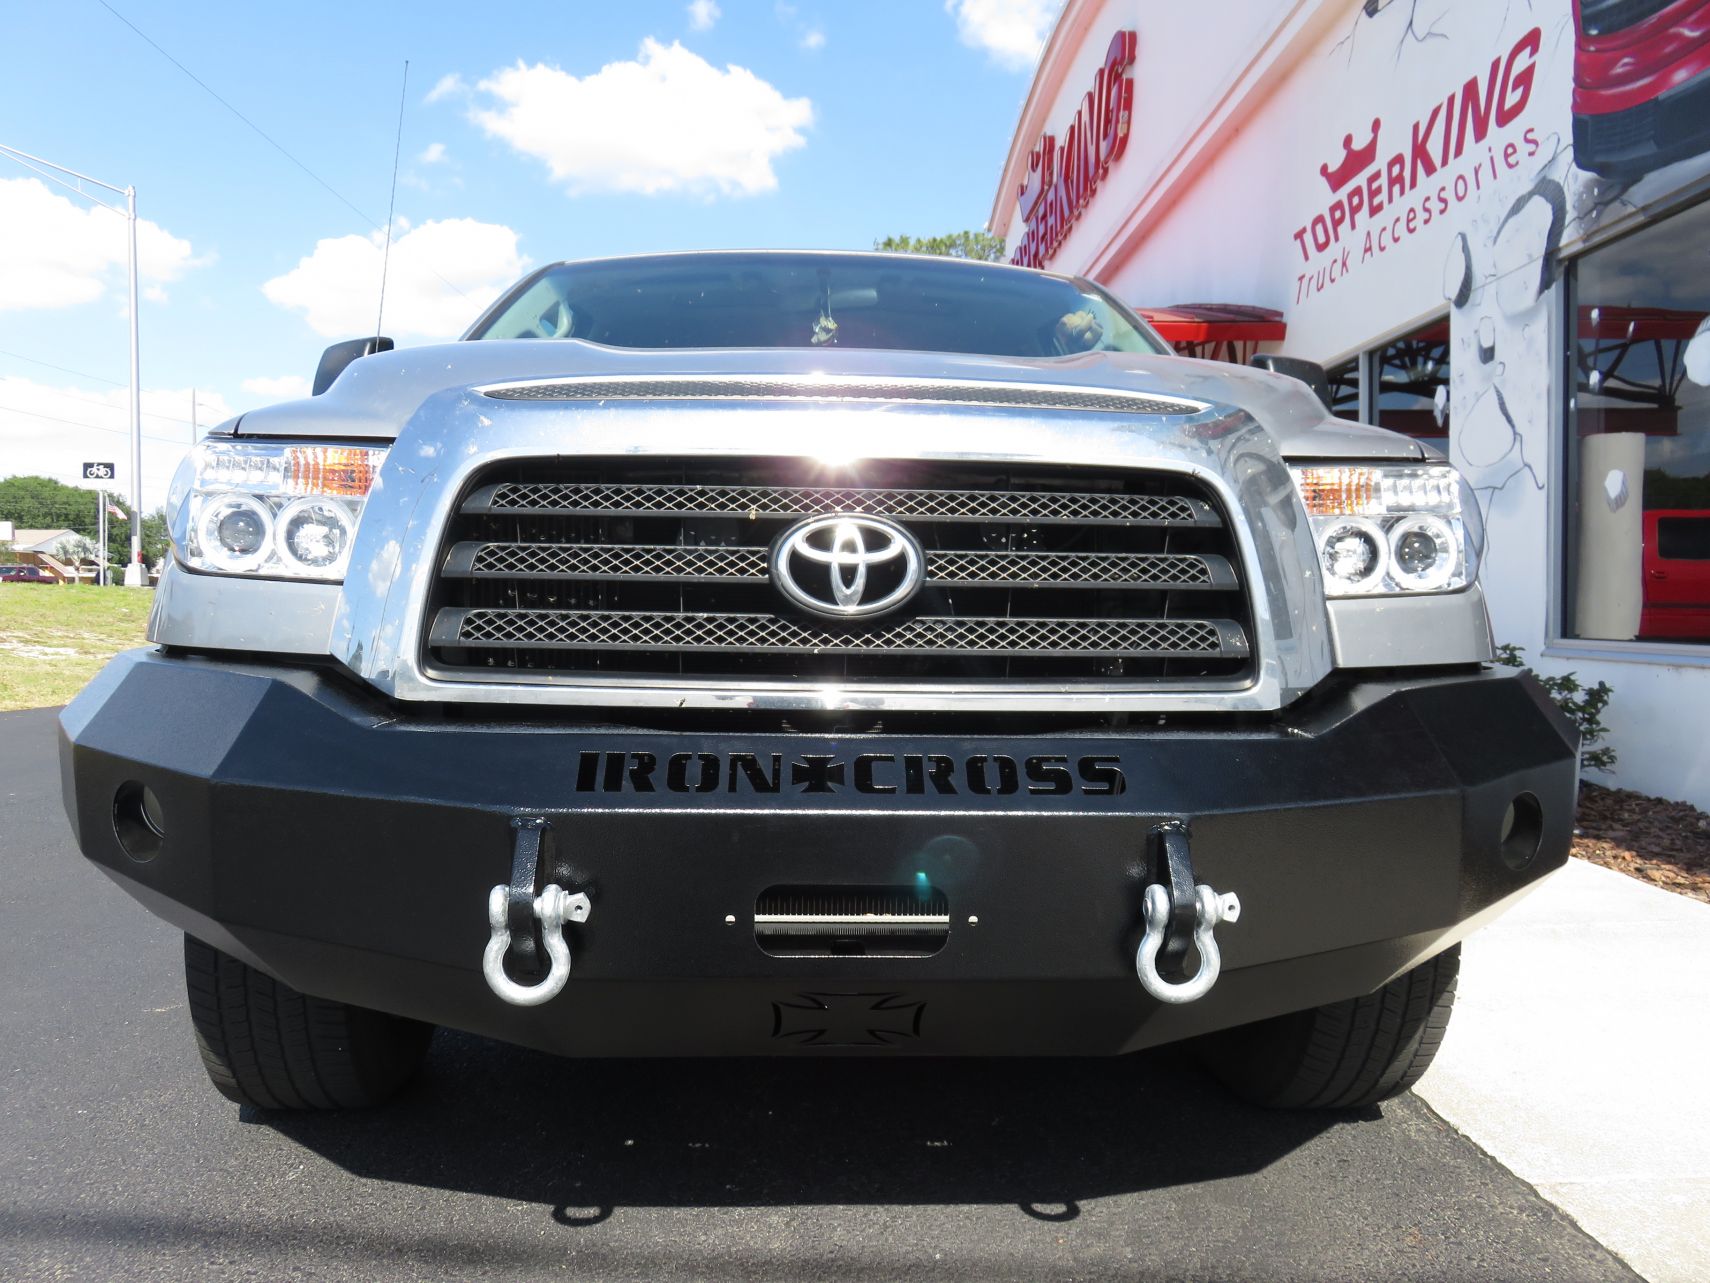 2013 Toyota Tundra with Iron Cross Bumper, Hitch, Tint by TopperKING in Brandon, FL 813-689-2449 or Clearwater, FL 727-530-9066. Call today!